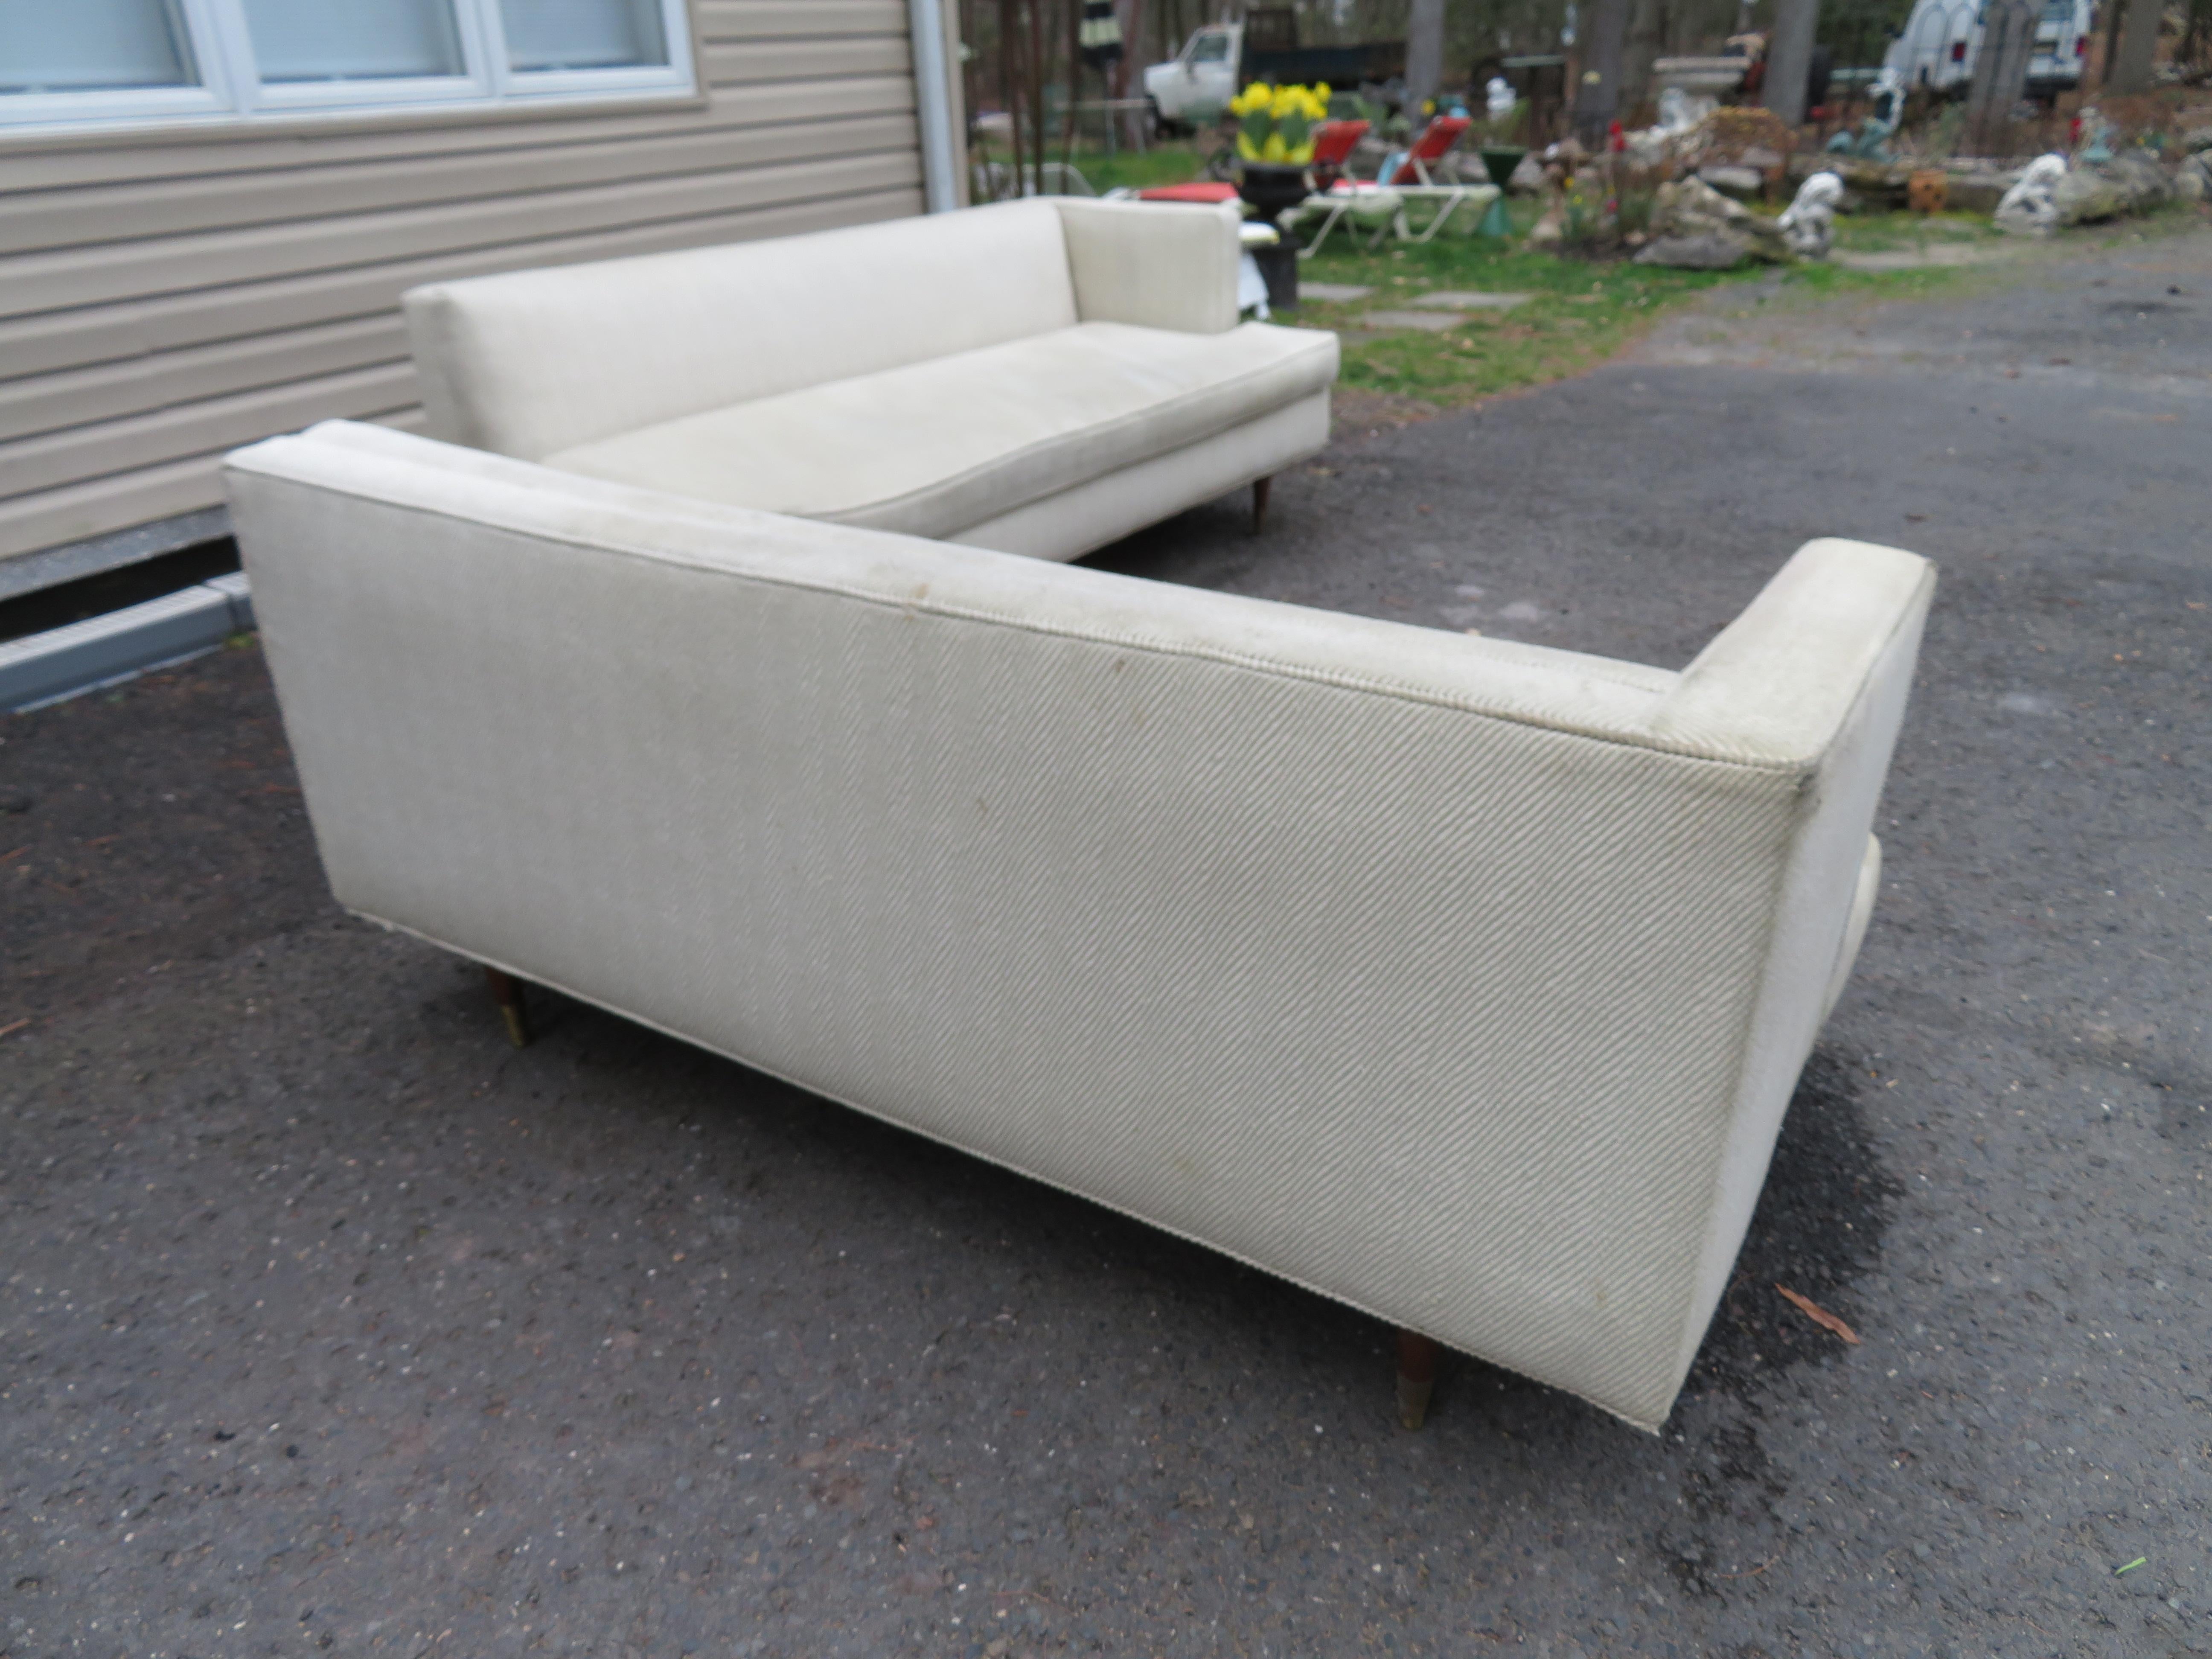 Stylish 2 piece Edward Wormley for Dunbar style sectional sofa. This one is going to need to be re-upholstered but oh the possibilities! We actually love the L-shaped setup and feel this would be great with a mid-century square table in the corner